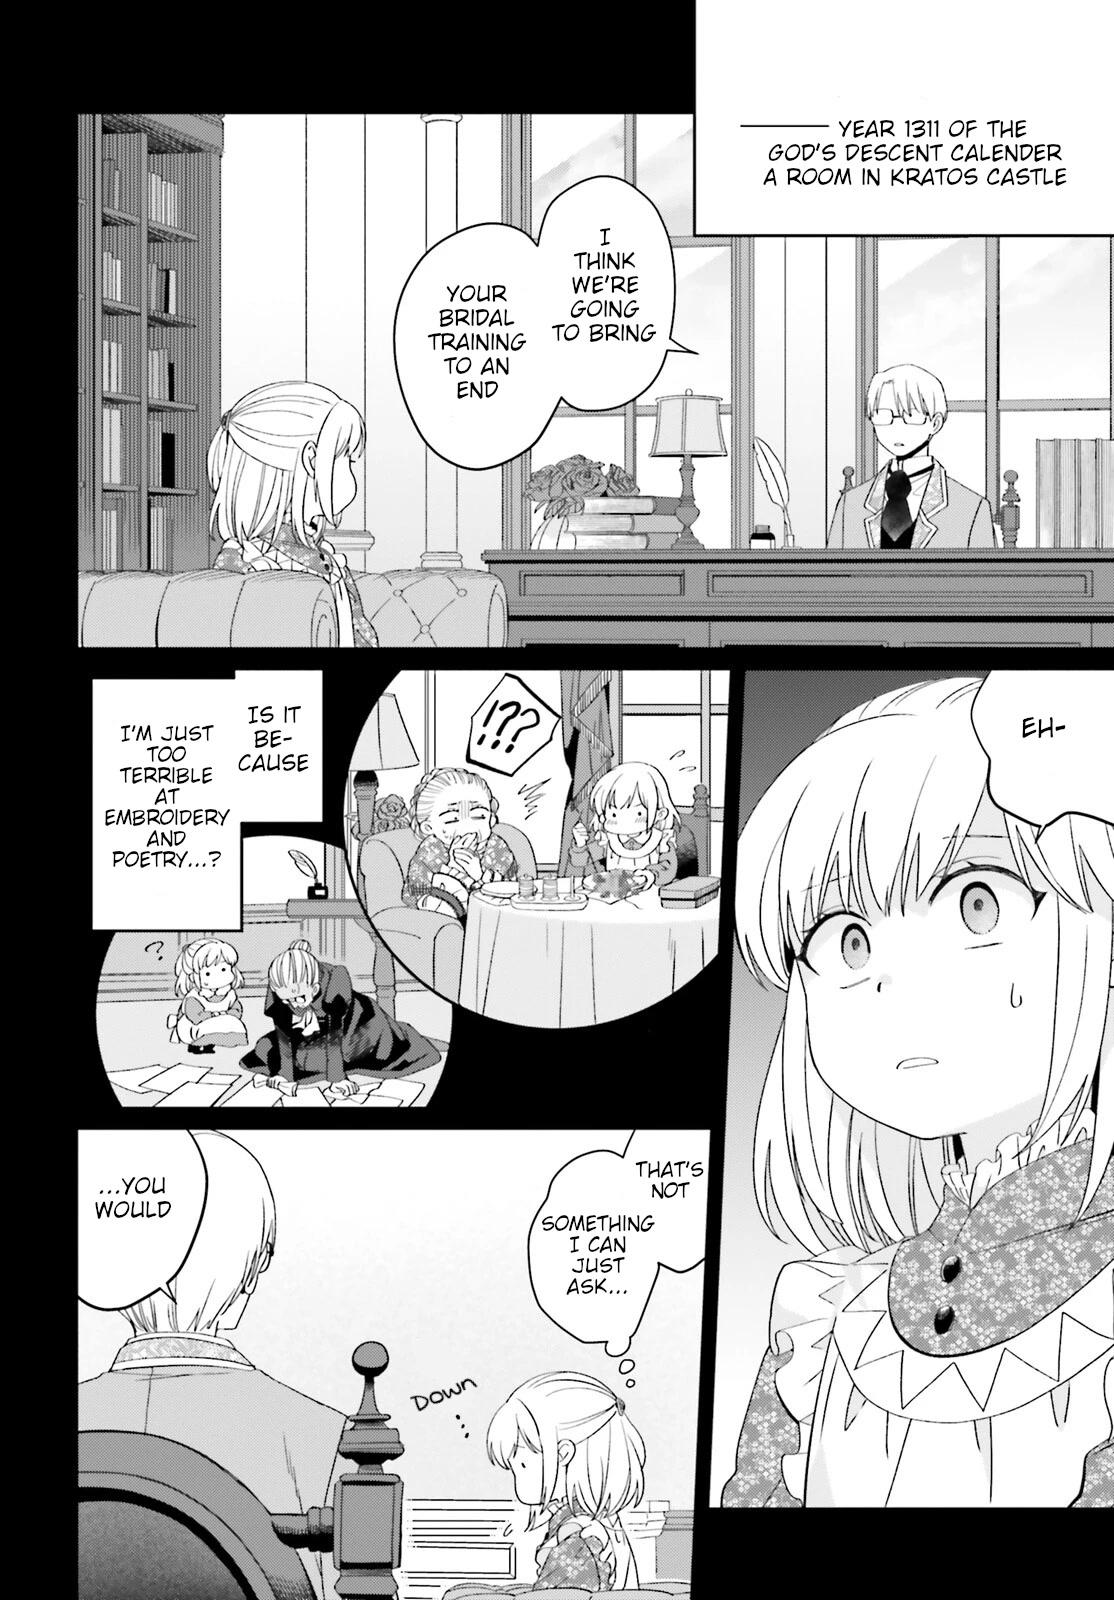 Win Over The Dragon Emperor This Time Around, Noble Girl! - Page 2